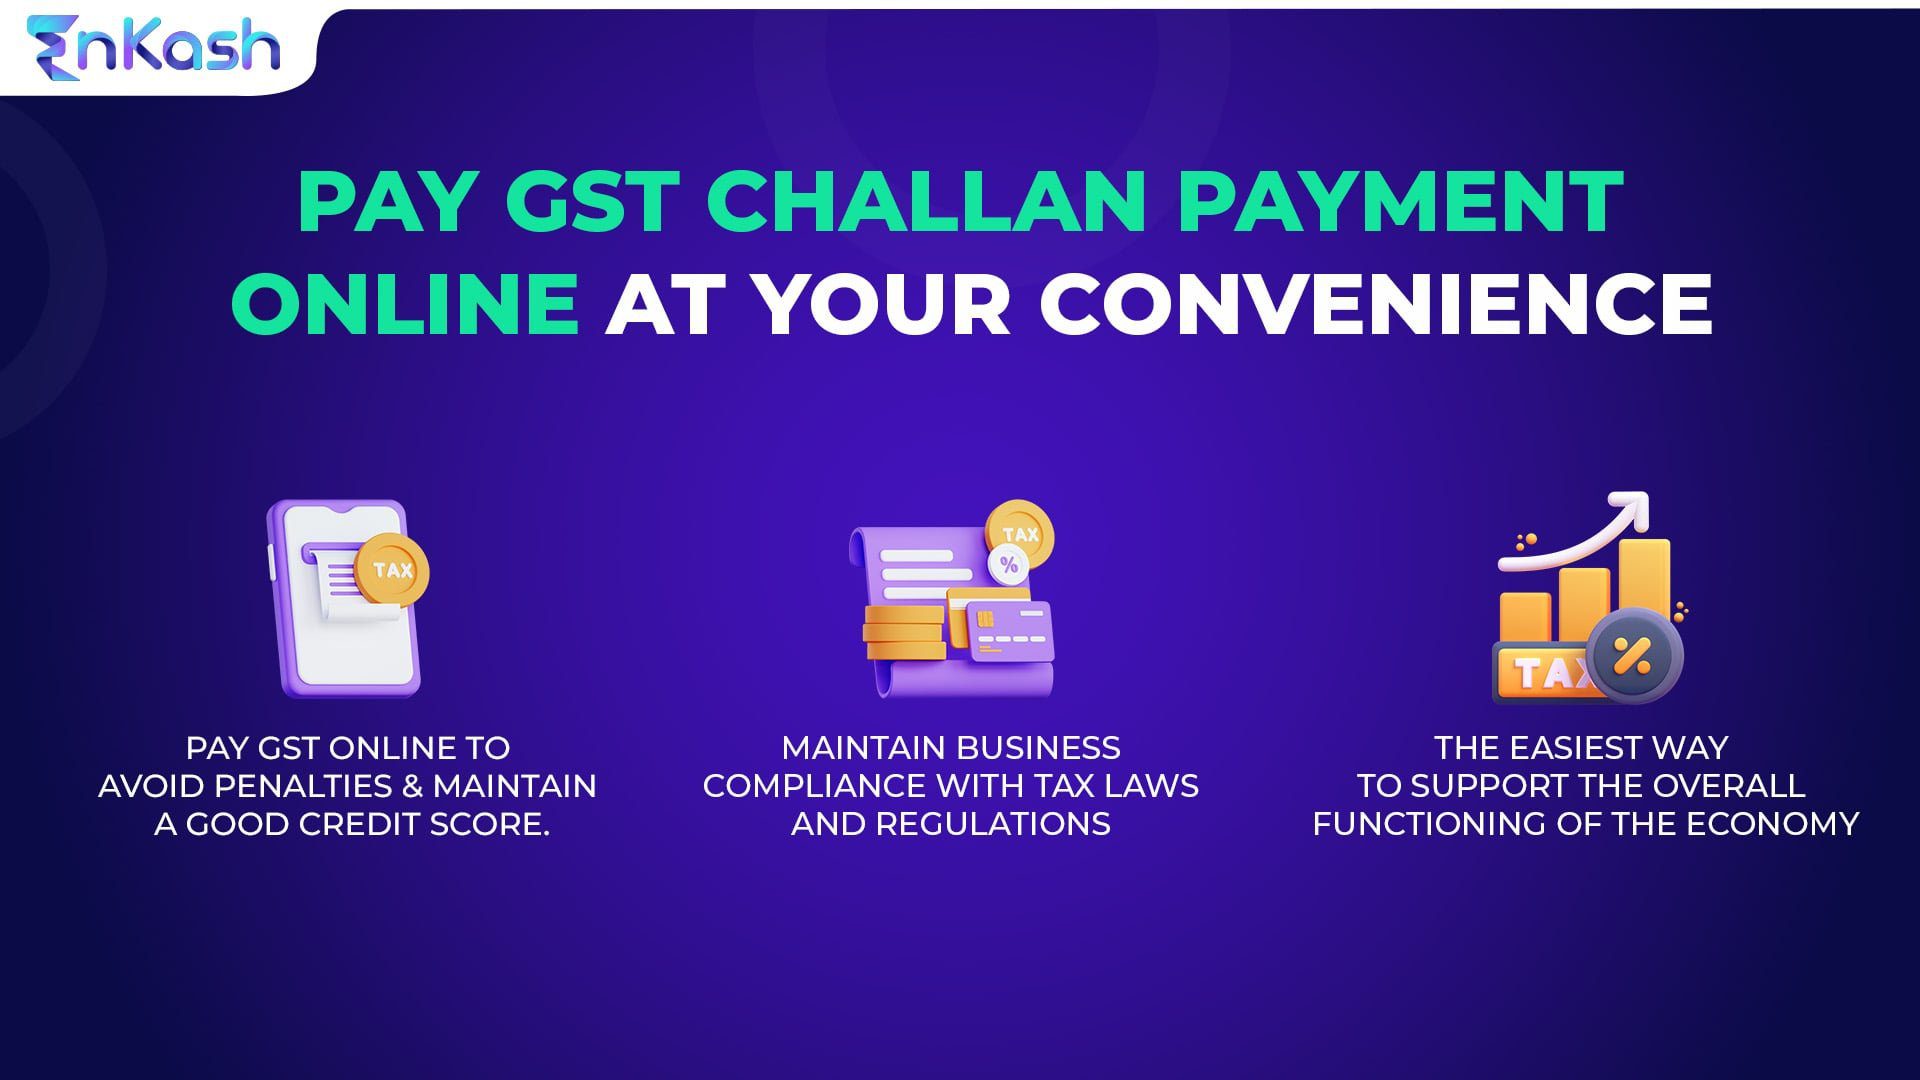 Pay GST Chalan Online at your convenience